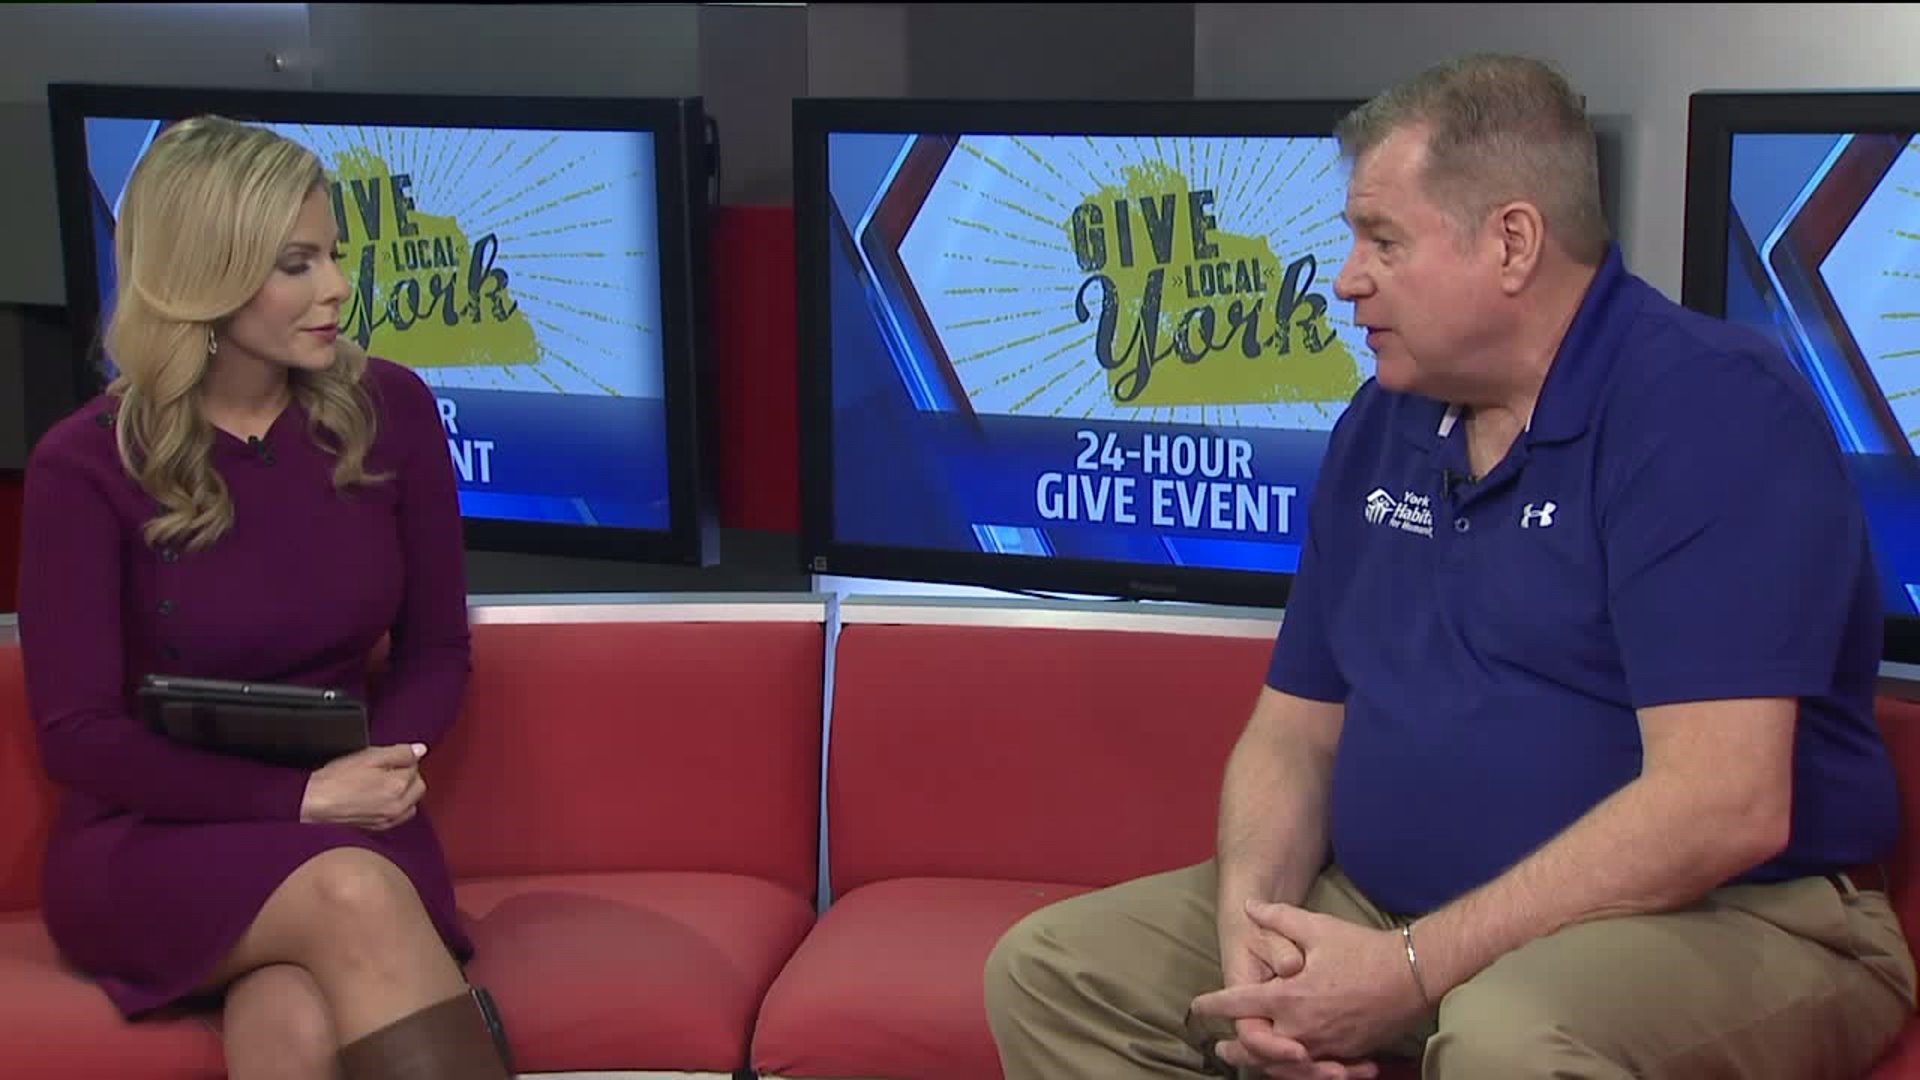 Give Local York: Habitat for Humanity